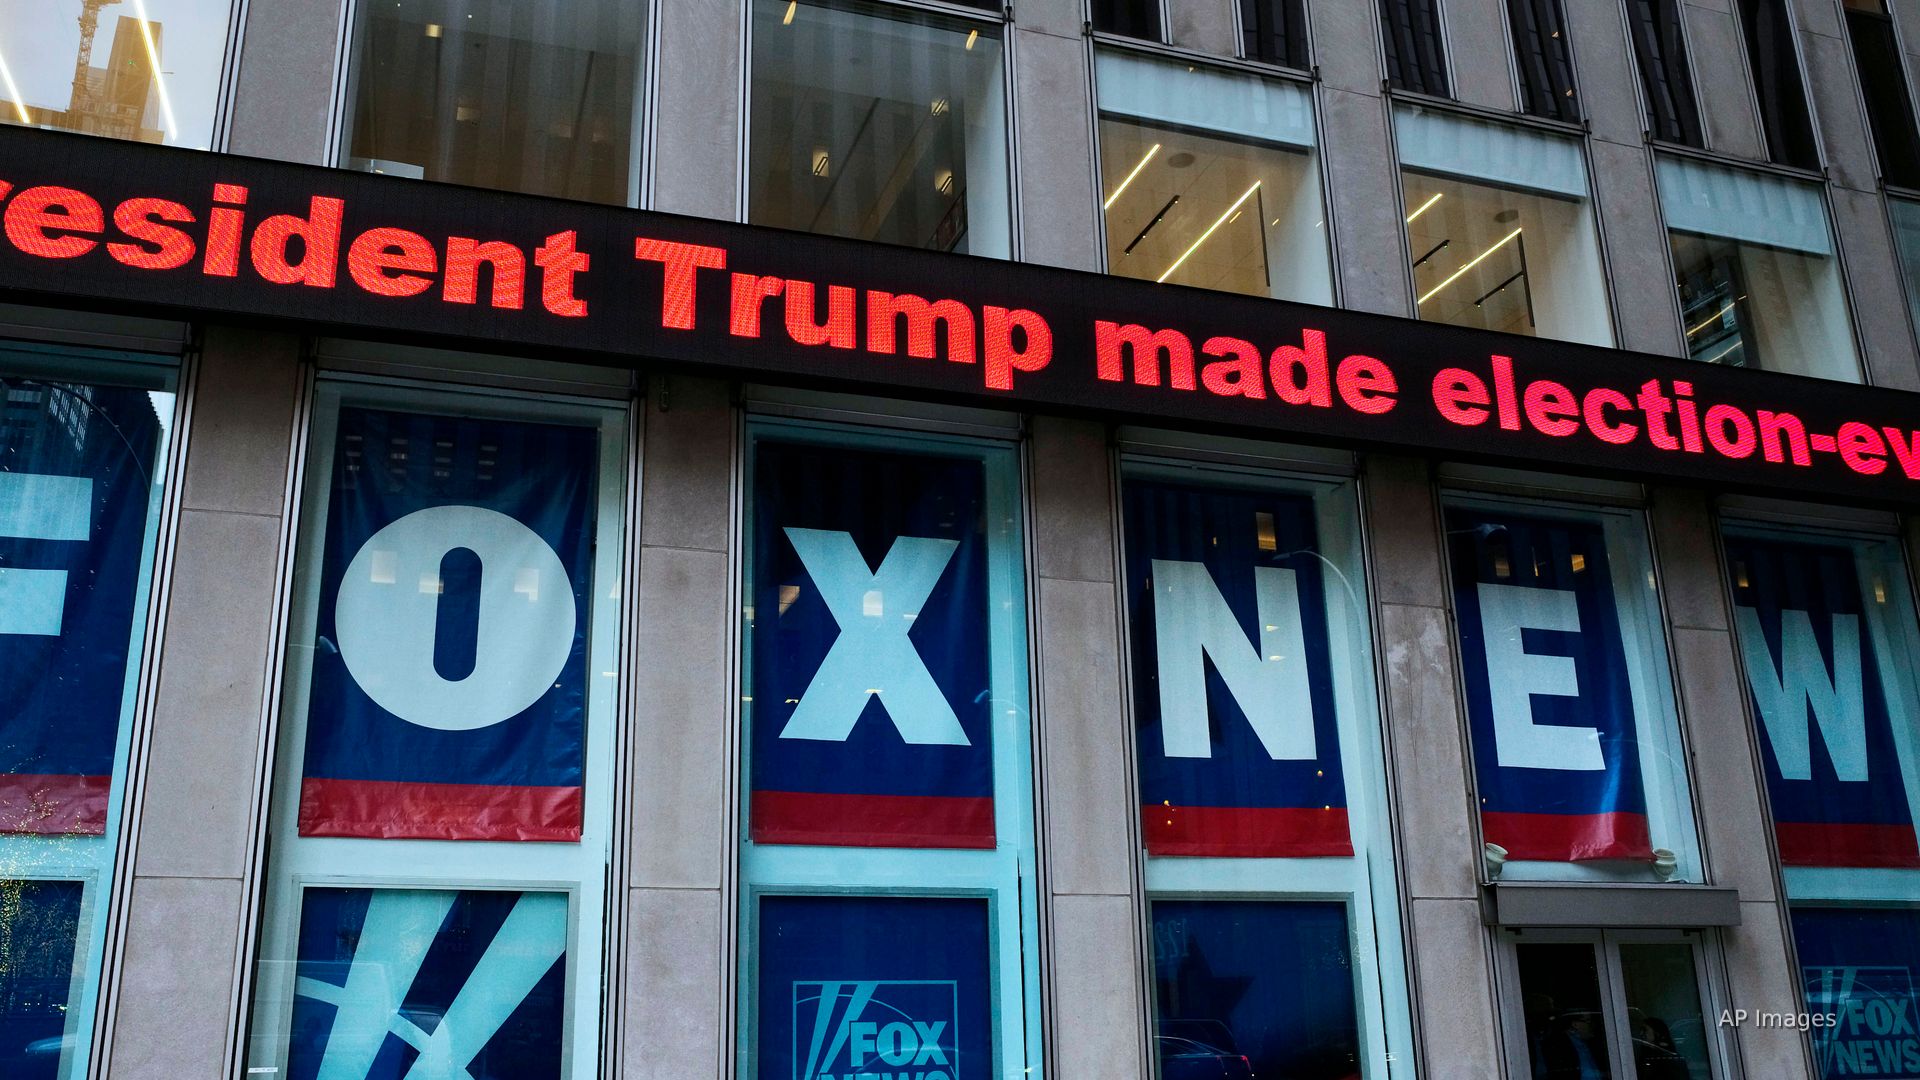 The trial of Dominion Voting Systems' .6 billion dollar defamation lawsuit against Fox News has been suddenly delayed until April 18.